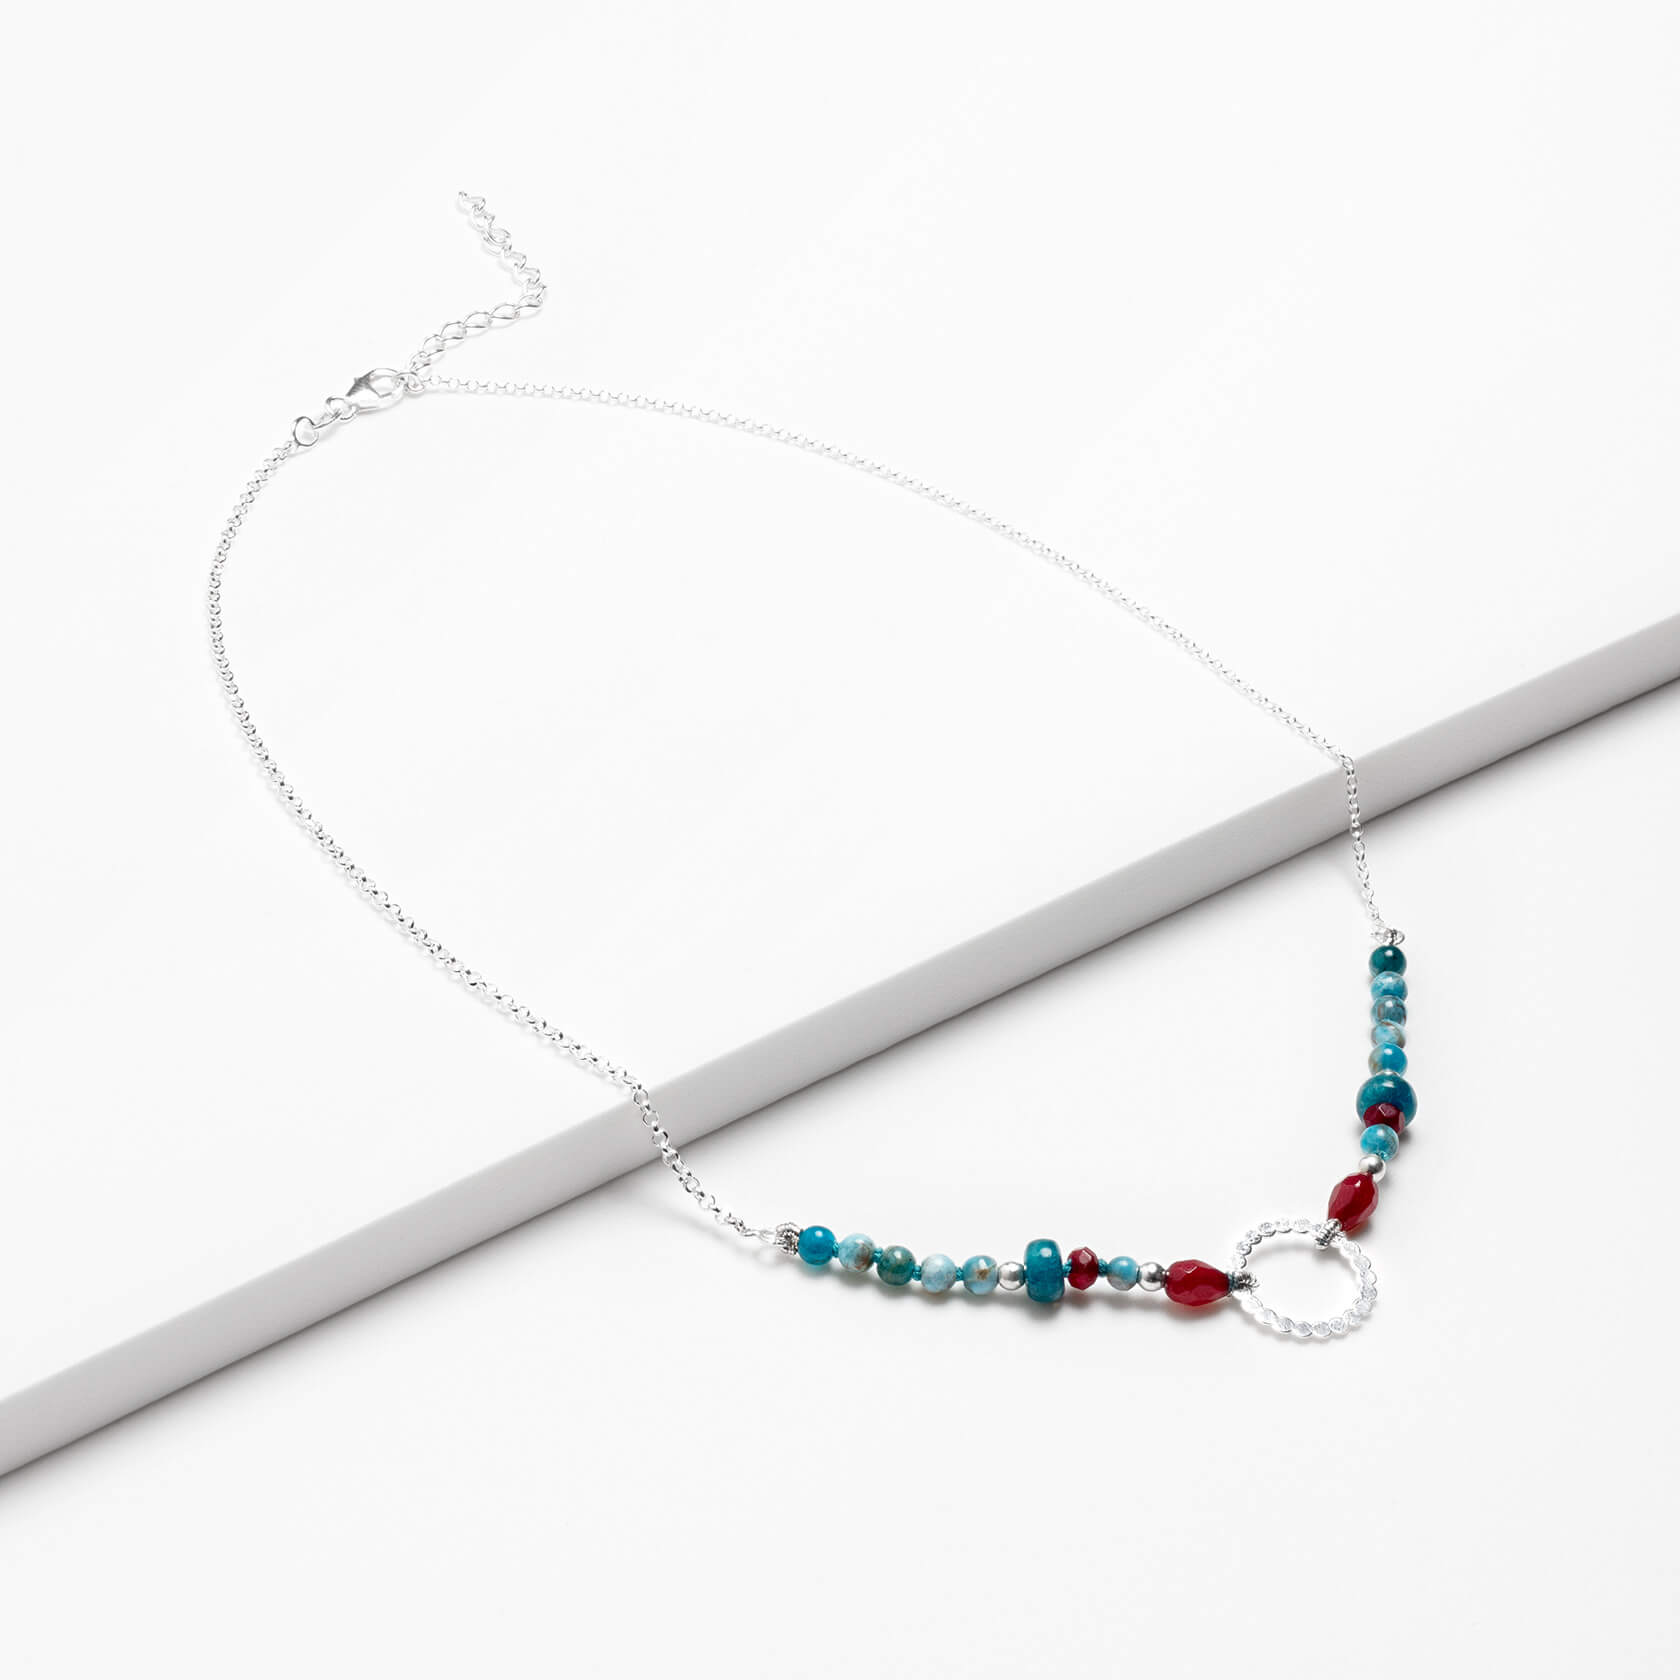 Agate and apatite necklace with silver